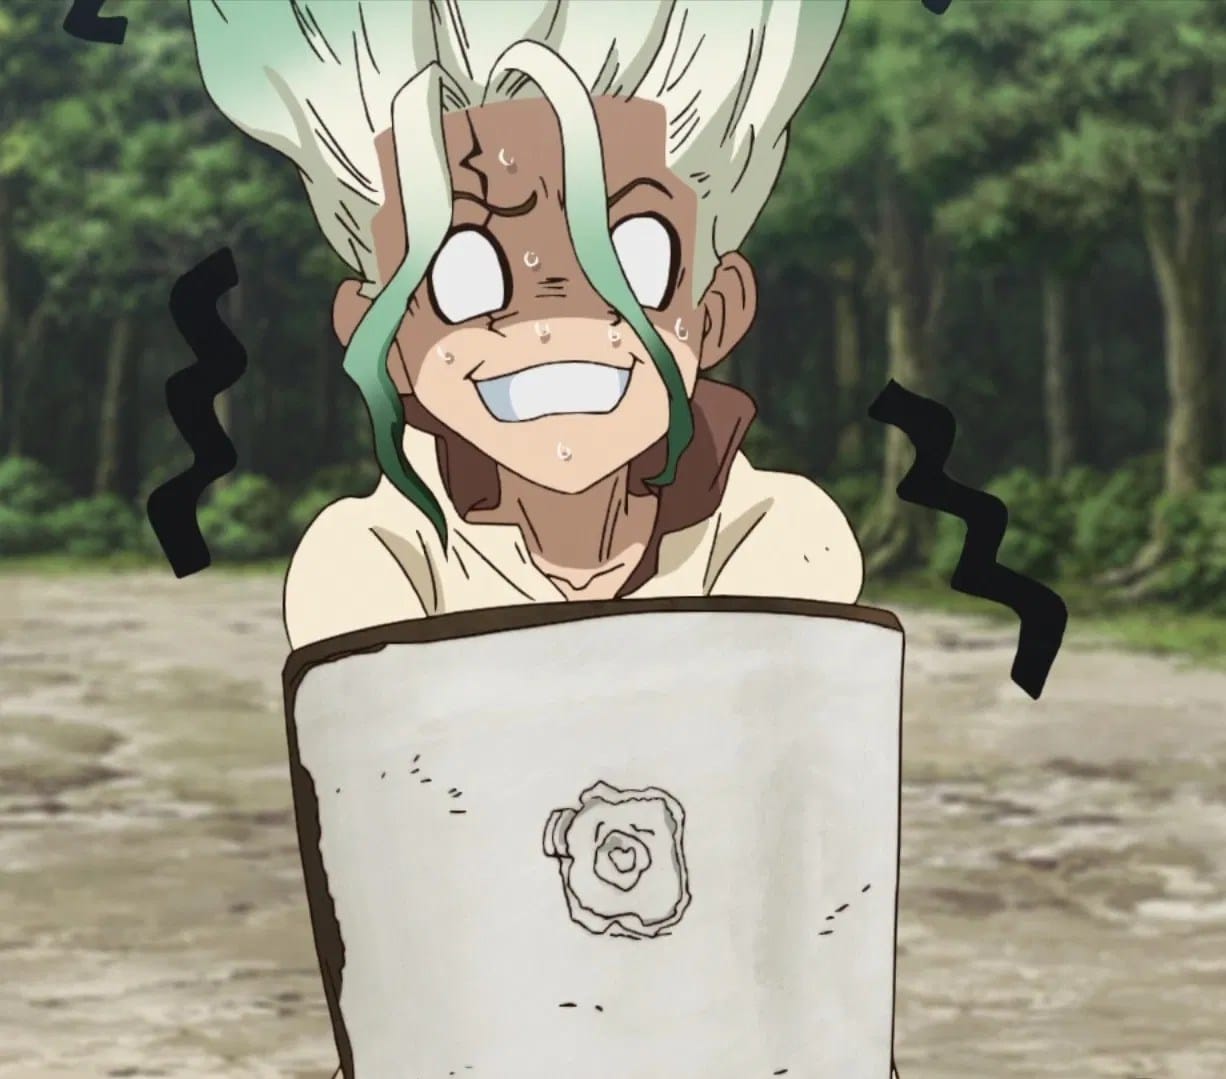 Dr. Stone 2 Episode 5